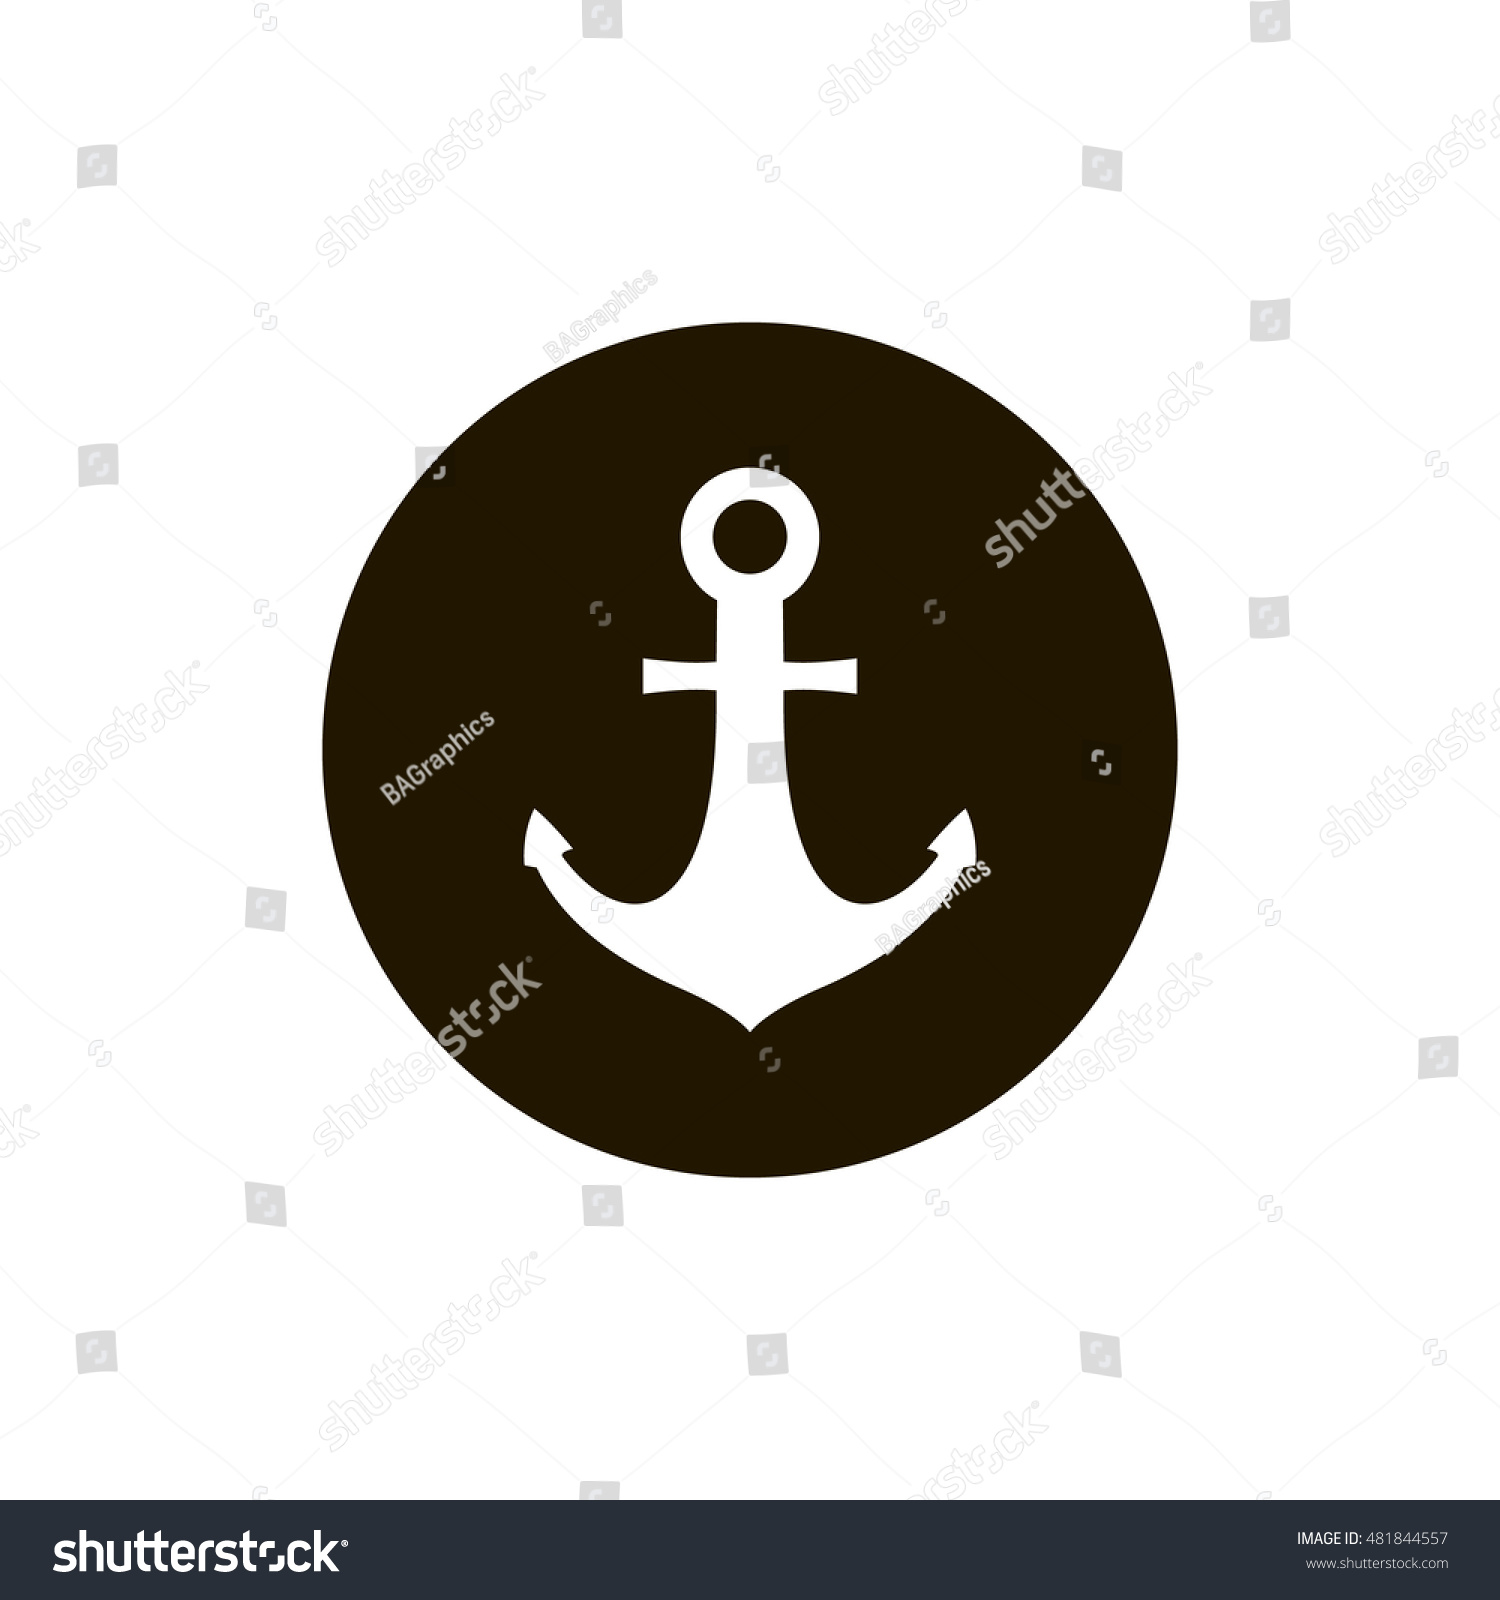 SVG of Anchor icon. Anchor clip art. Art design illustration. Compatible with ai, cdr, pdf, png and eps formats. Compatible with ai, cdr, jpg, png, svg, pdf, ico and eps. svg